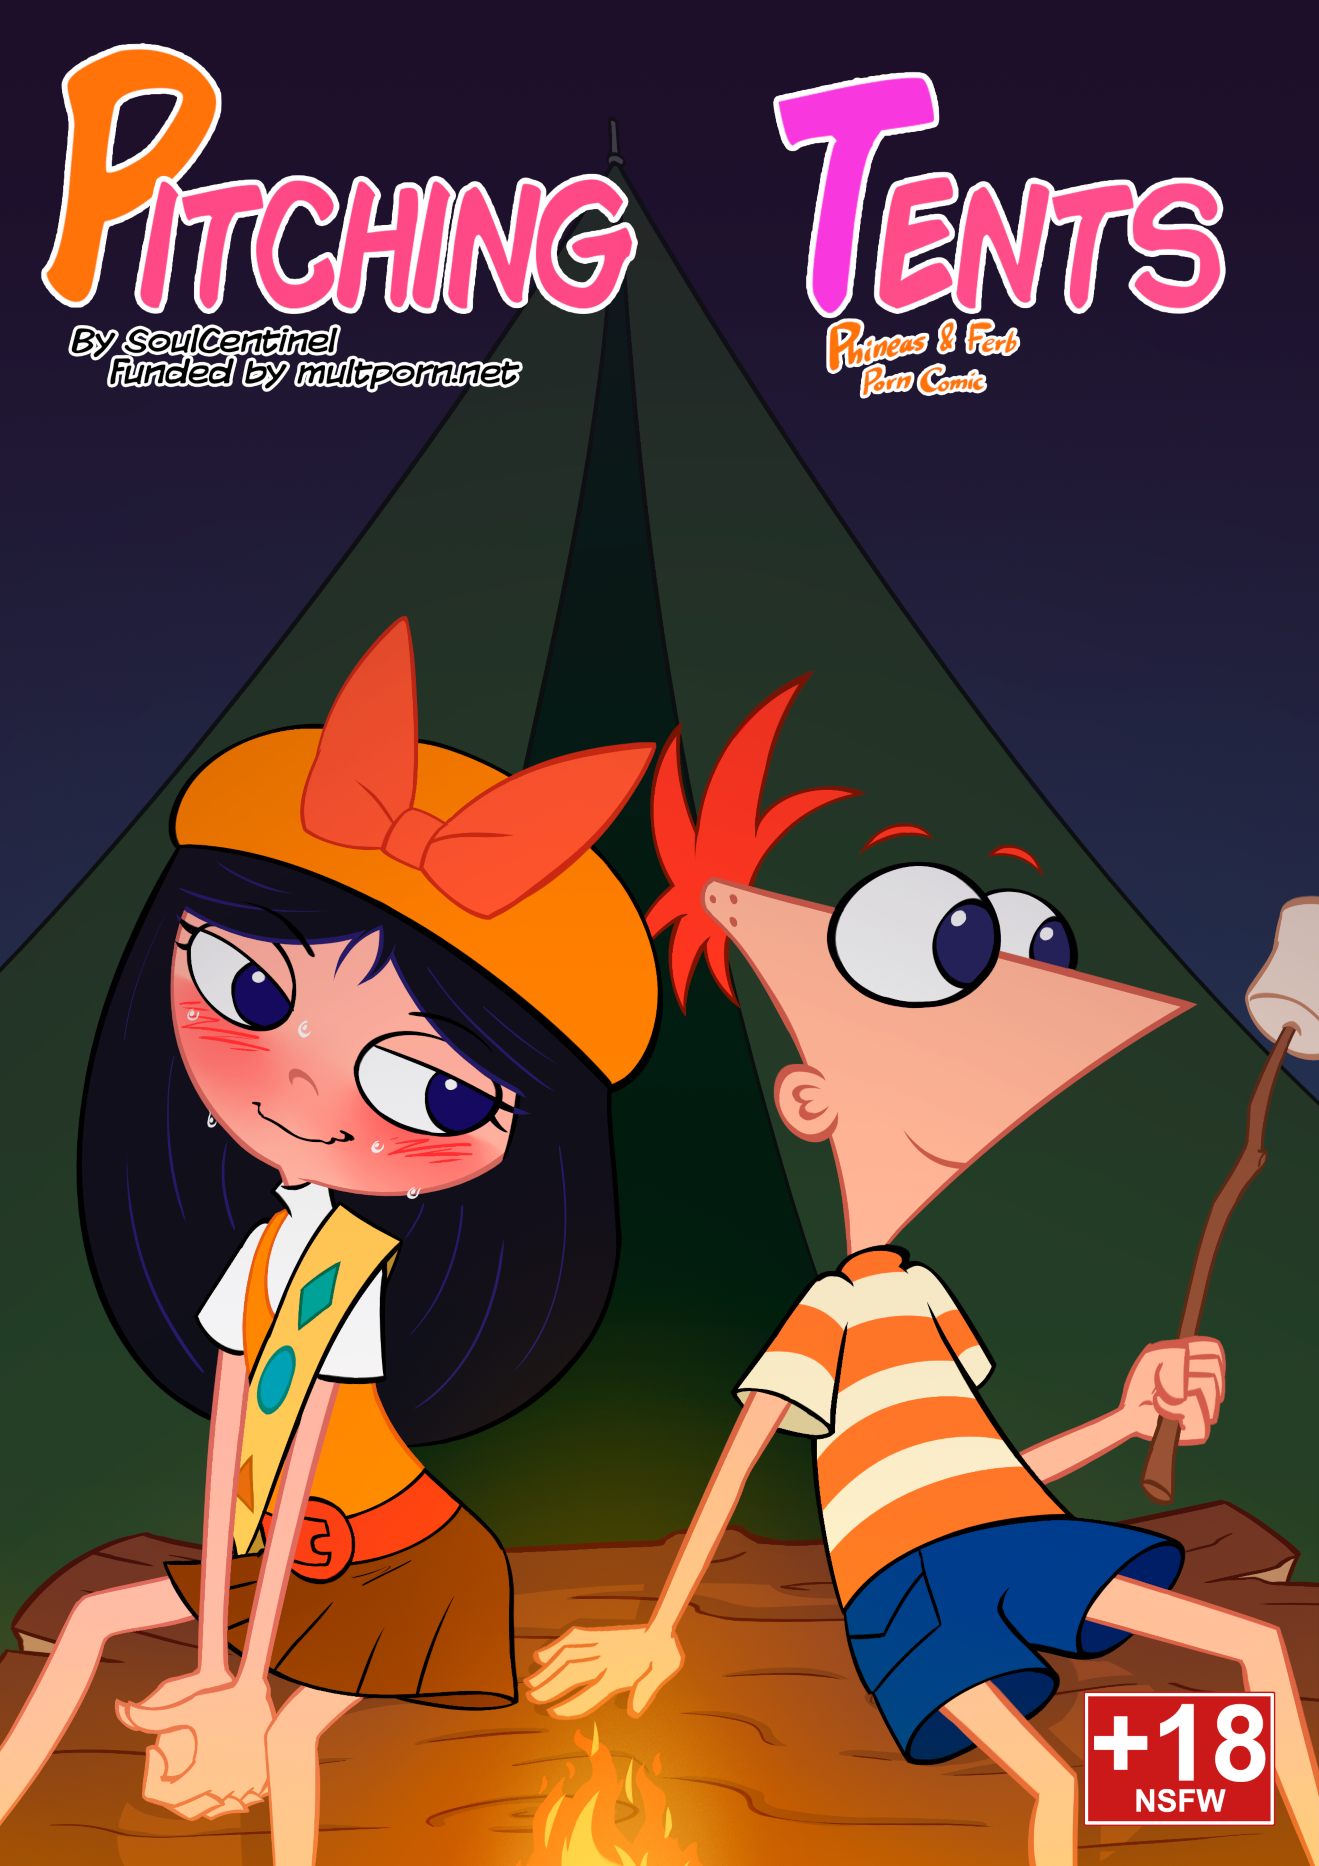 Phineas And Ferb Lesbians - Pitching Tents - Phineas and Ferb [SoulCentinel] - FreeAdultComix